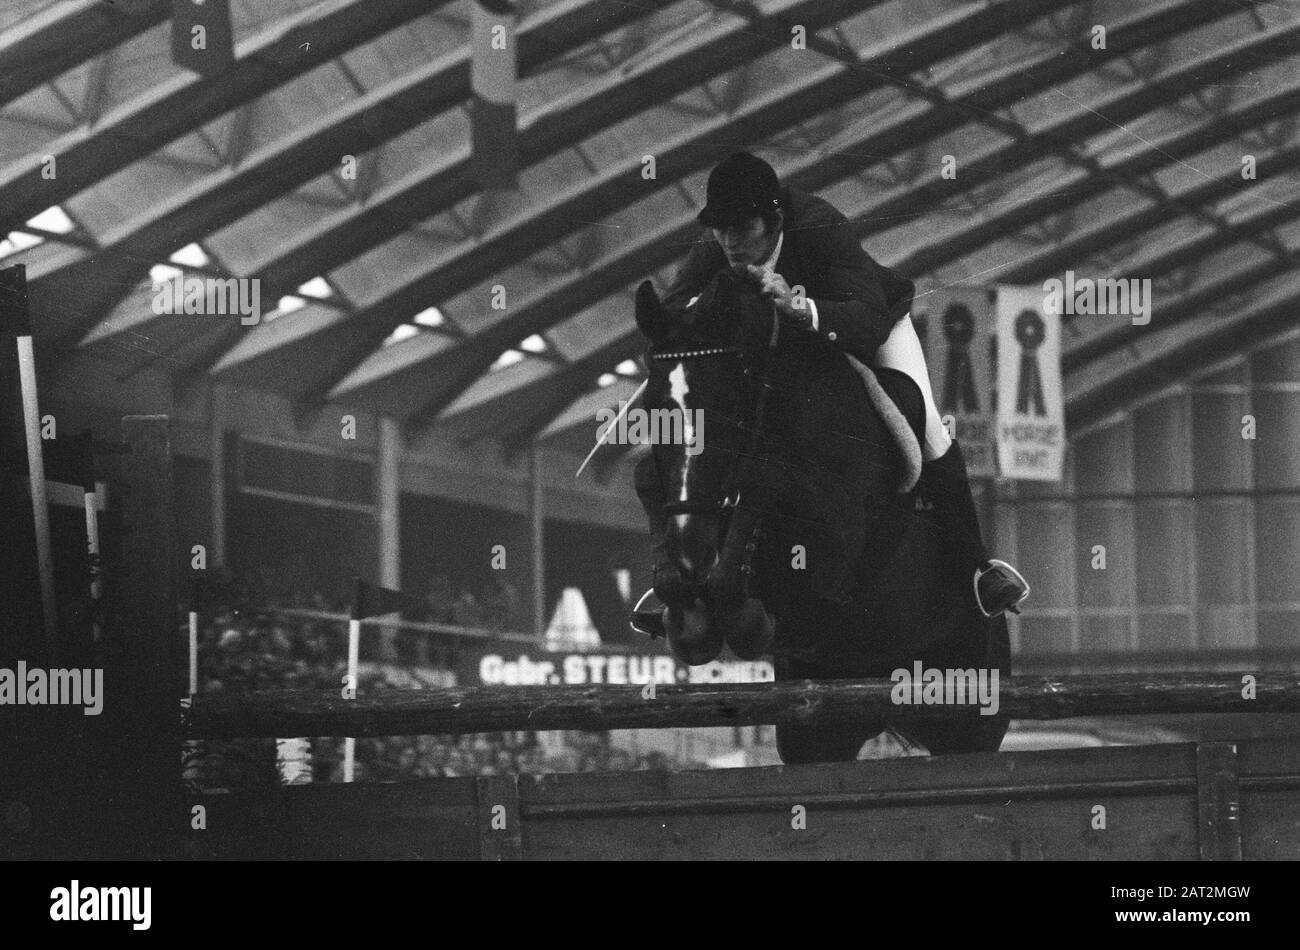 Jumping Amsterdam in RAI  Gerd Wildfang in action with Ehre Date: 4 November 1973 Location: Amsterdam, Noord-Holland Keywords: horses, riders, jumping competitions Personal name: Wildfang, G. Stock Photo